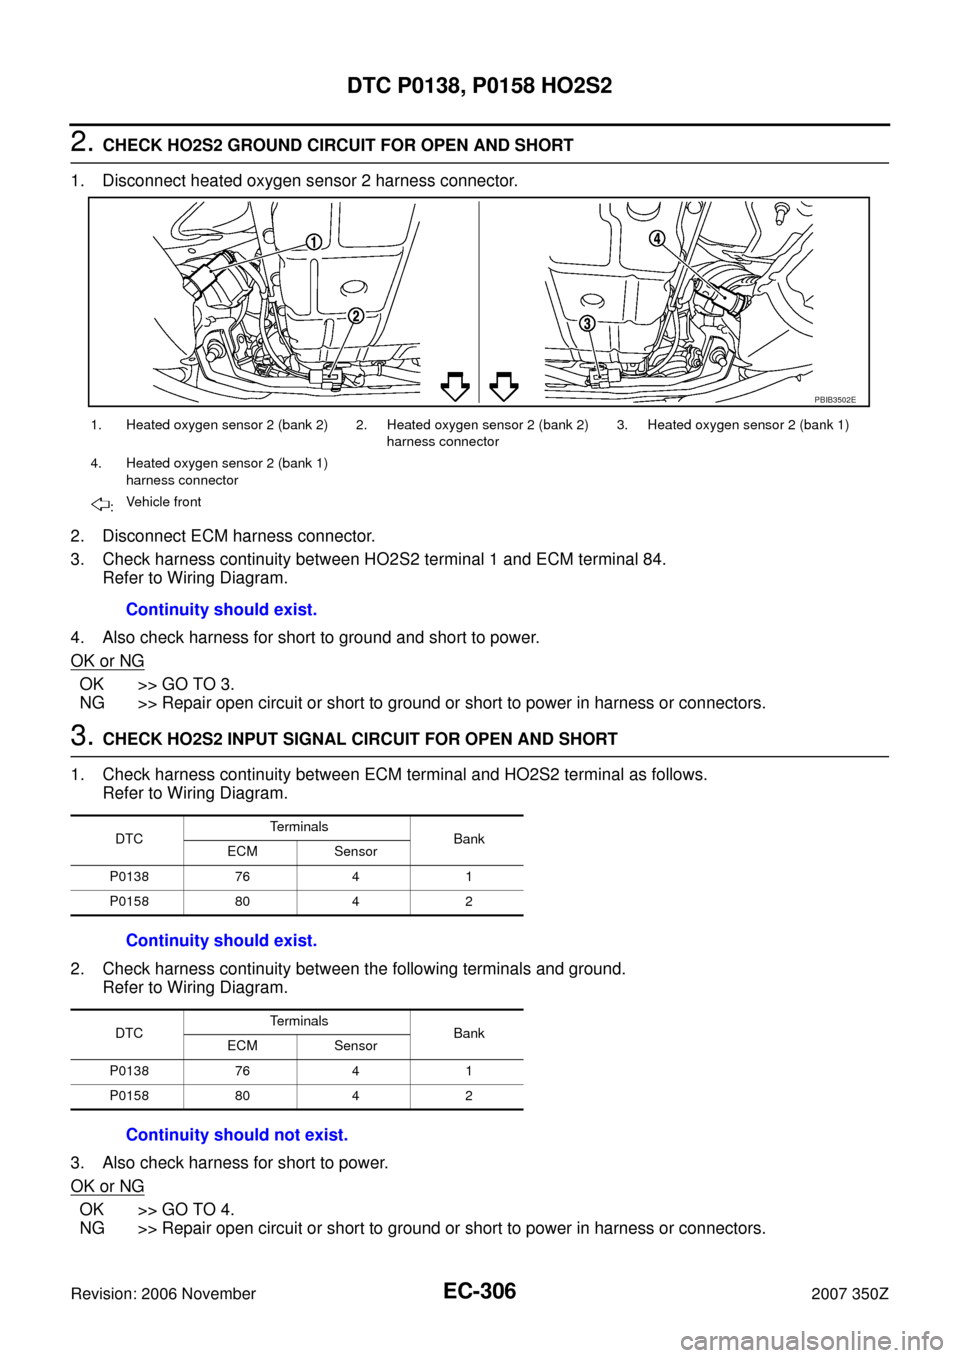 NISSAN 350Z 2007 Z33 Engine Control Service Manual EC-306
DTC P0138, P0158 HO2S2
Revision: 2006 November2007 350Z
2. CHECK HO2S2 GROUND CIRCUIT FOR OPEN AND SHORT
1. Disconnect heated oxygen sensor 2 harness connector.
2. Disconnect ECM harness connec